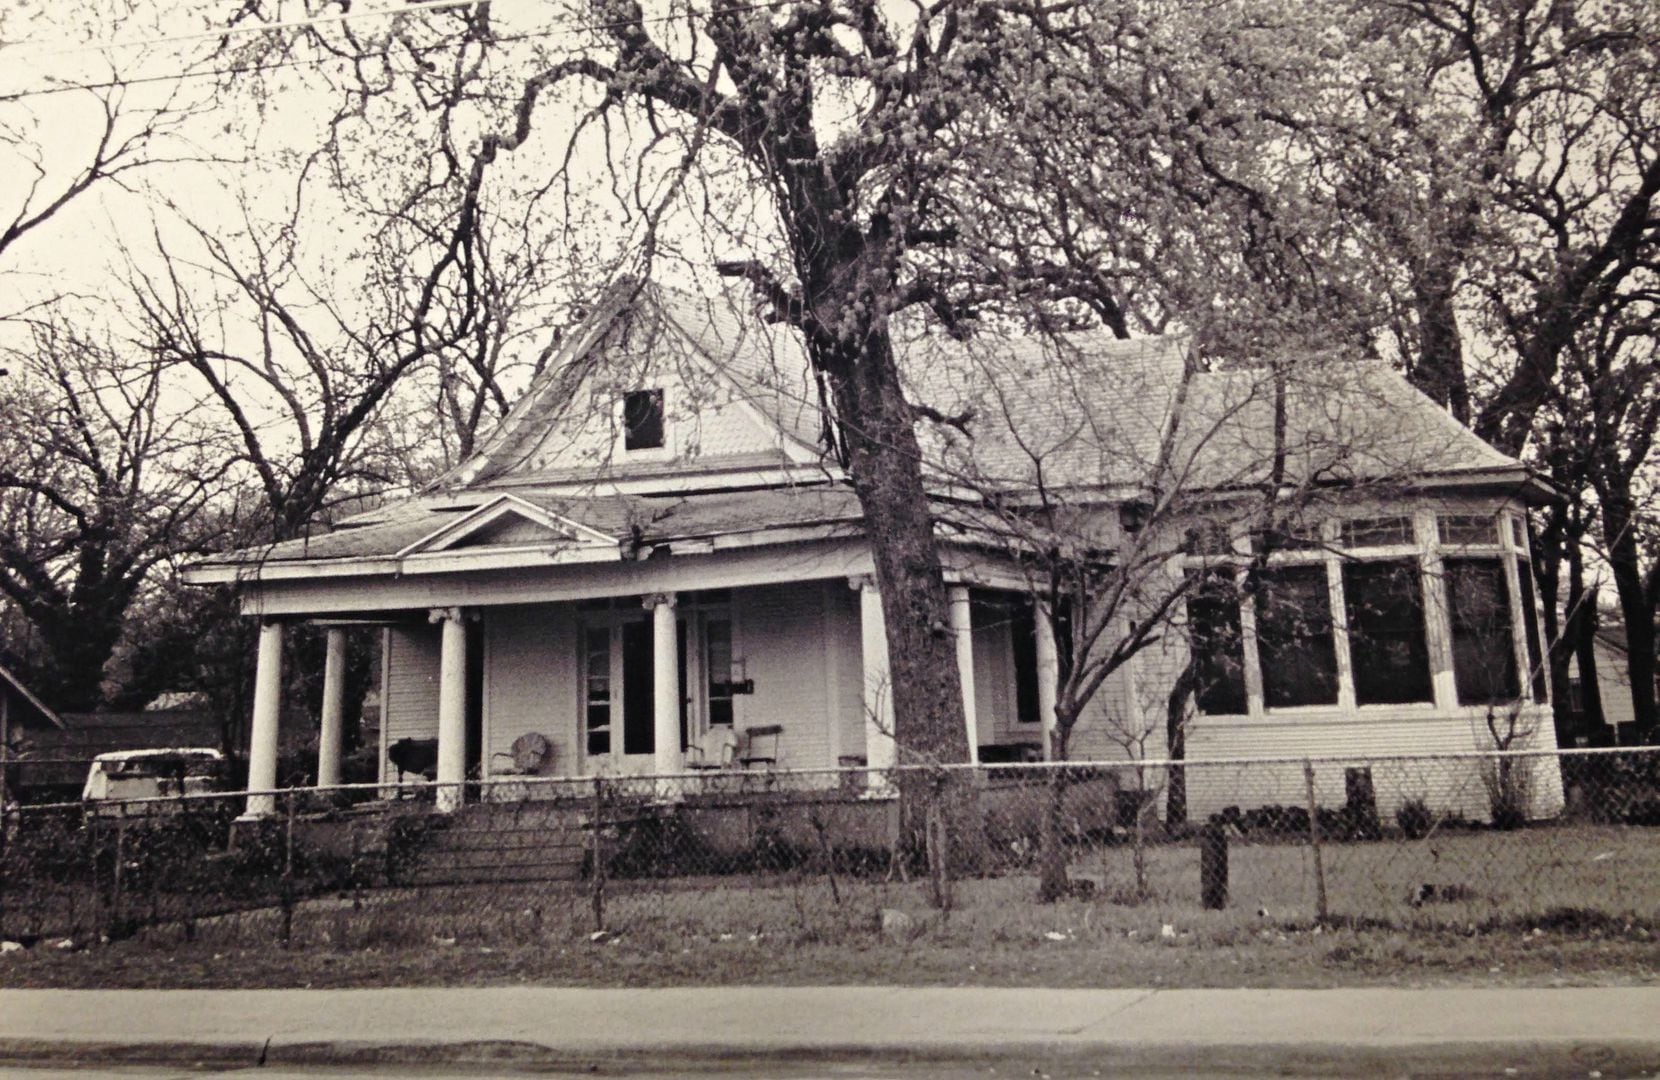 An undated photo of 2426 Pine St. in South Dallas, which no longer exists except as a towering of charred lumber